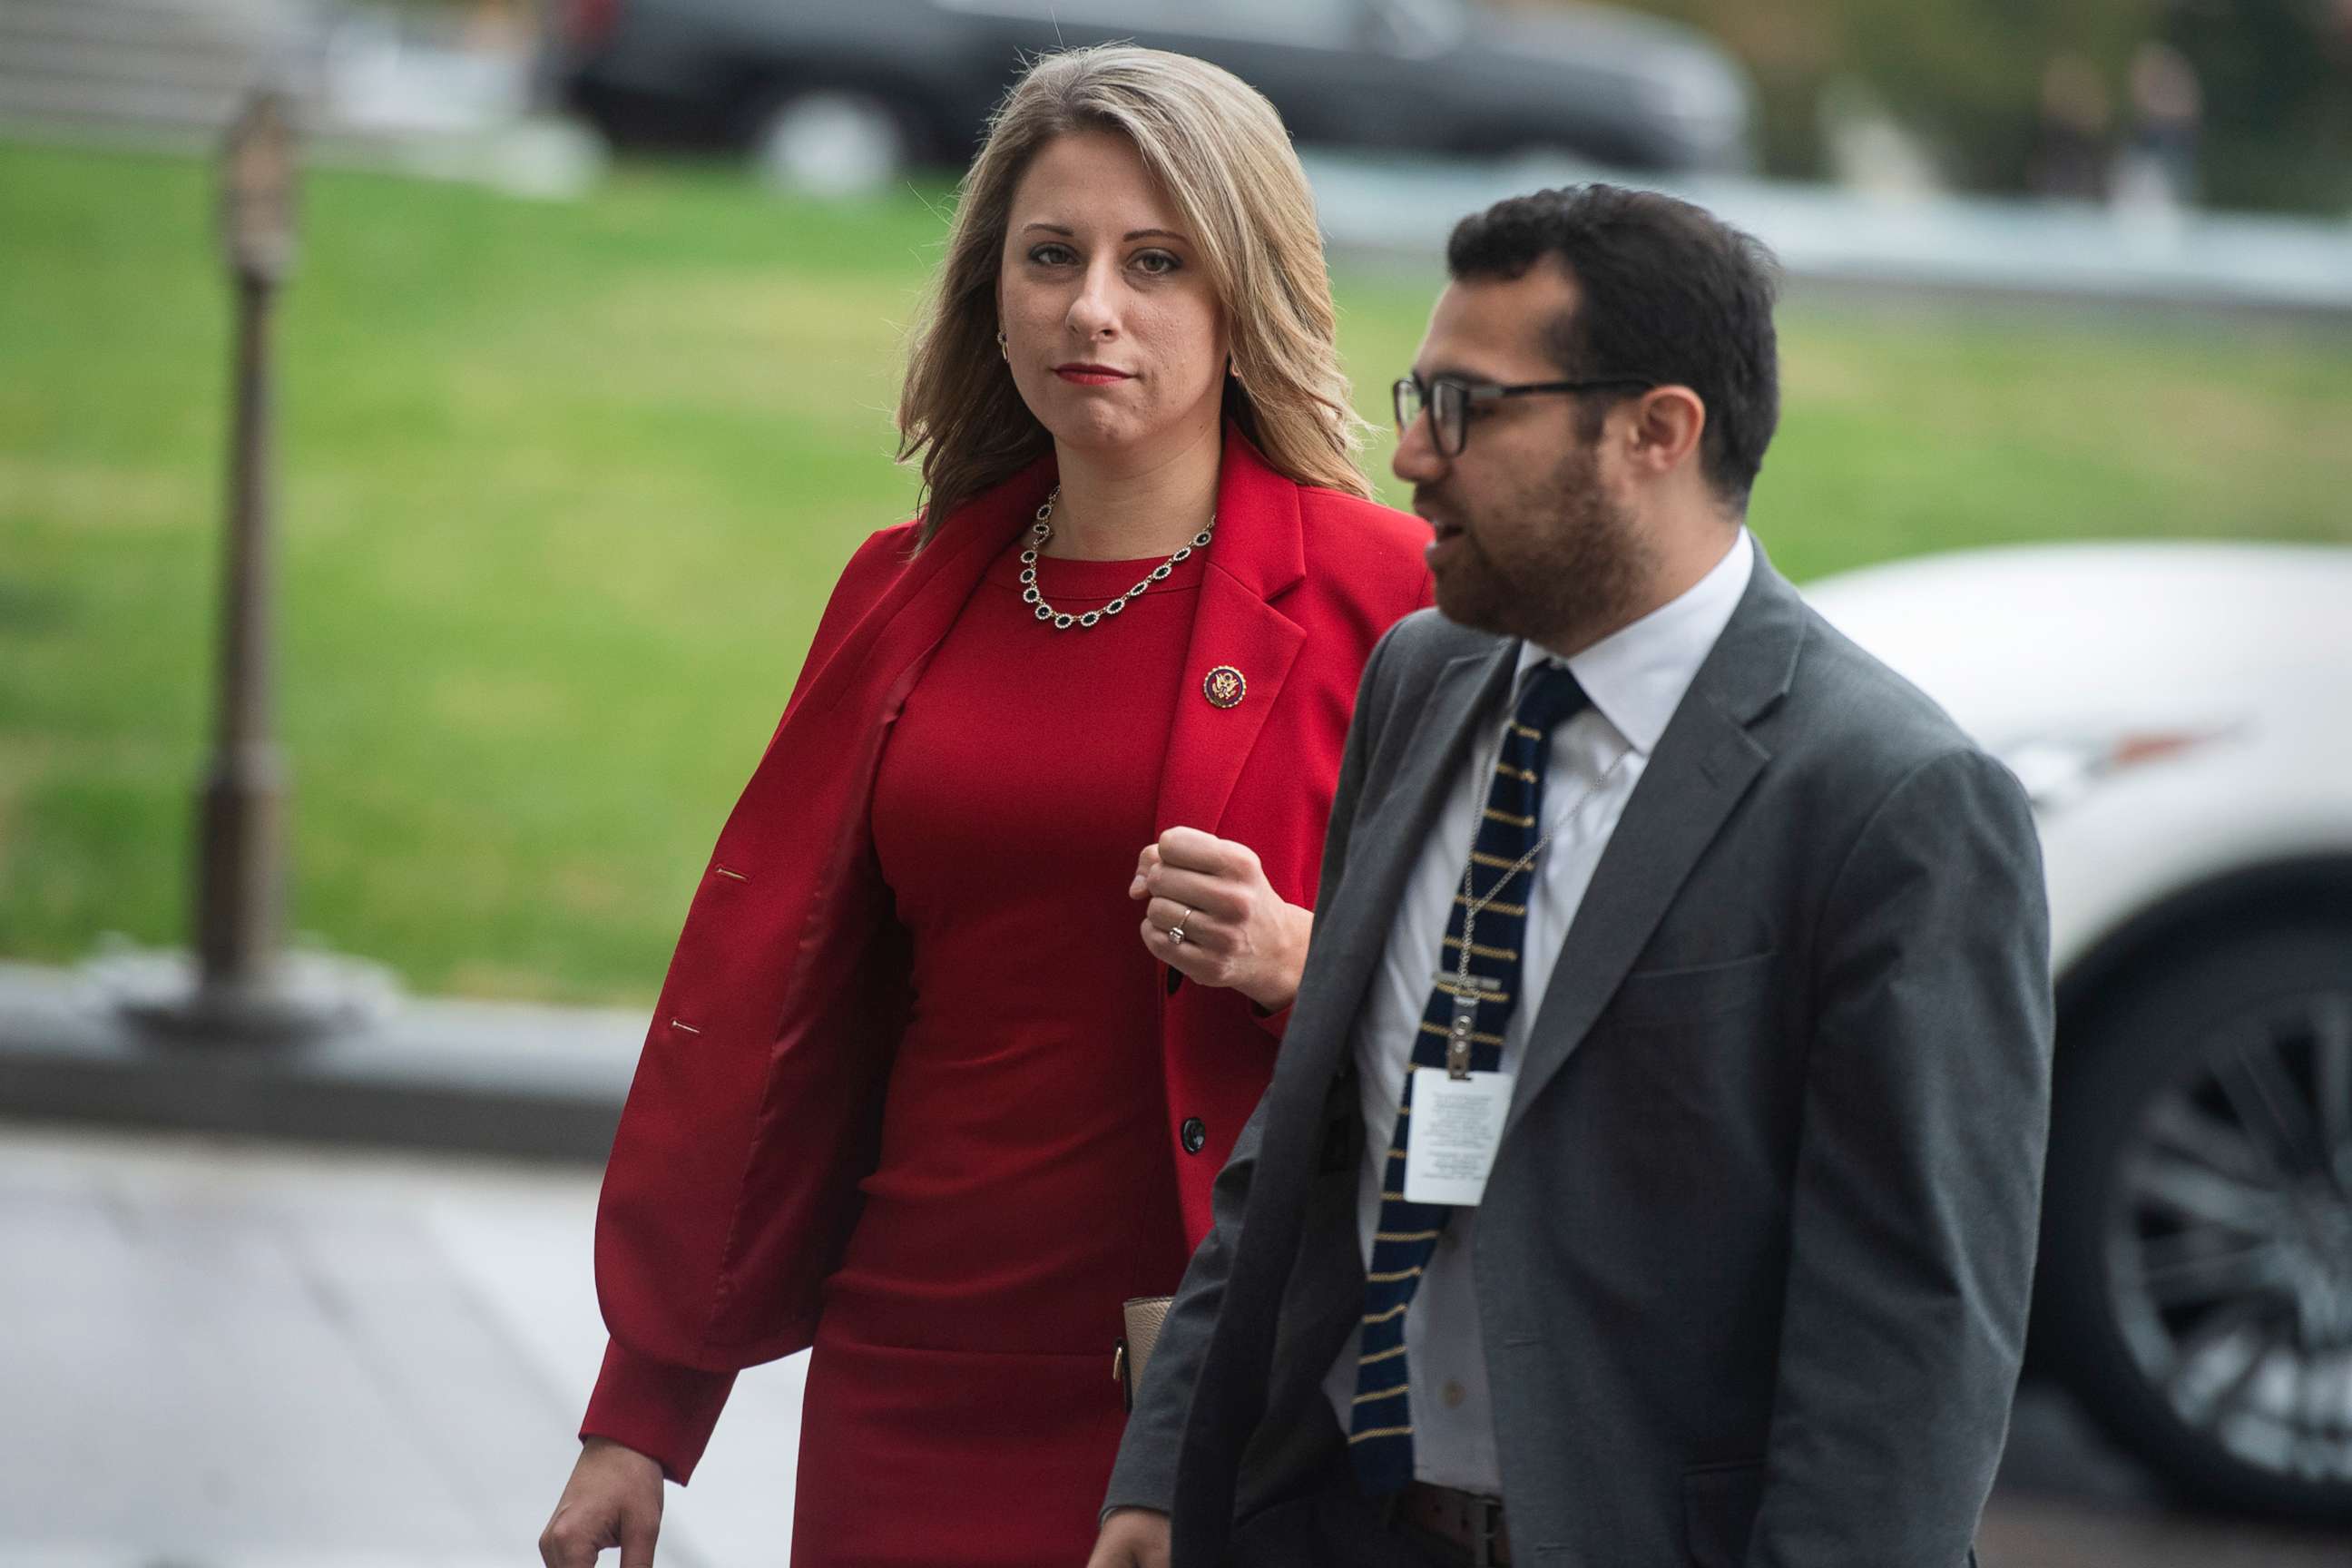 PHOTO: Rep. Katie Hill arrives to the Capitol for the House vote on an impeachment inquiry resolution, Oct. 31, 2019, for the last series of votes before her resignation, for having an improper relationship with an aide.